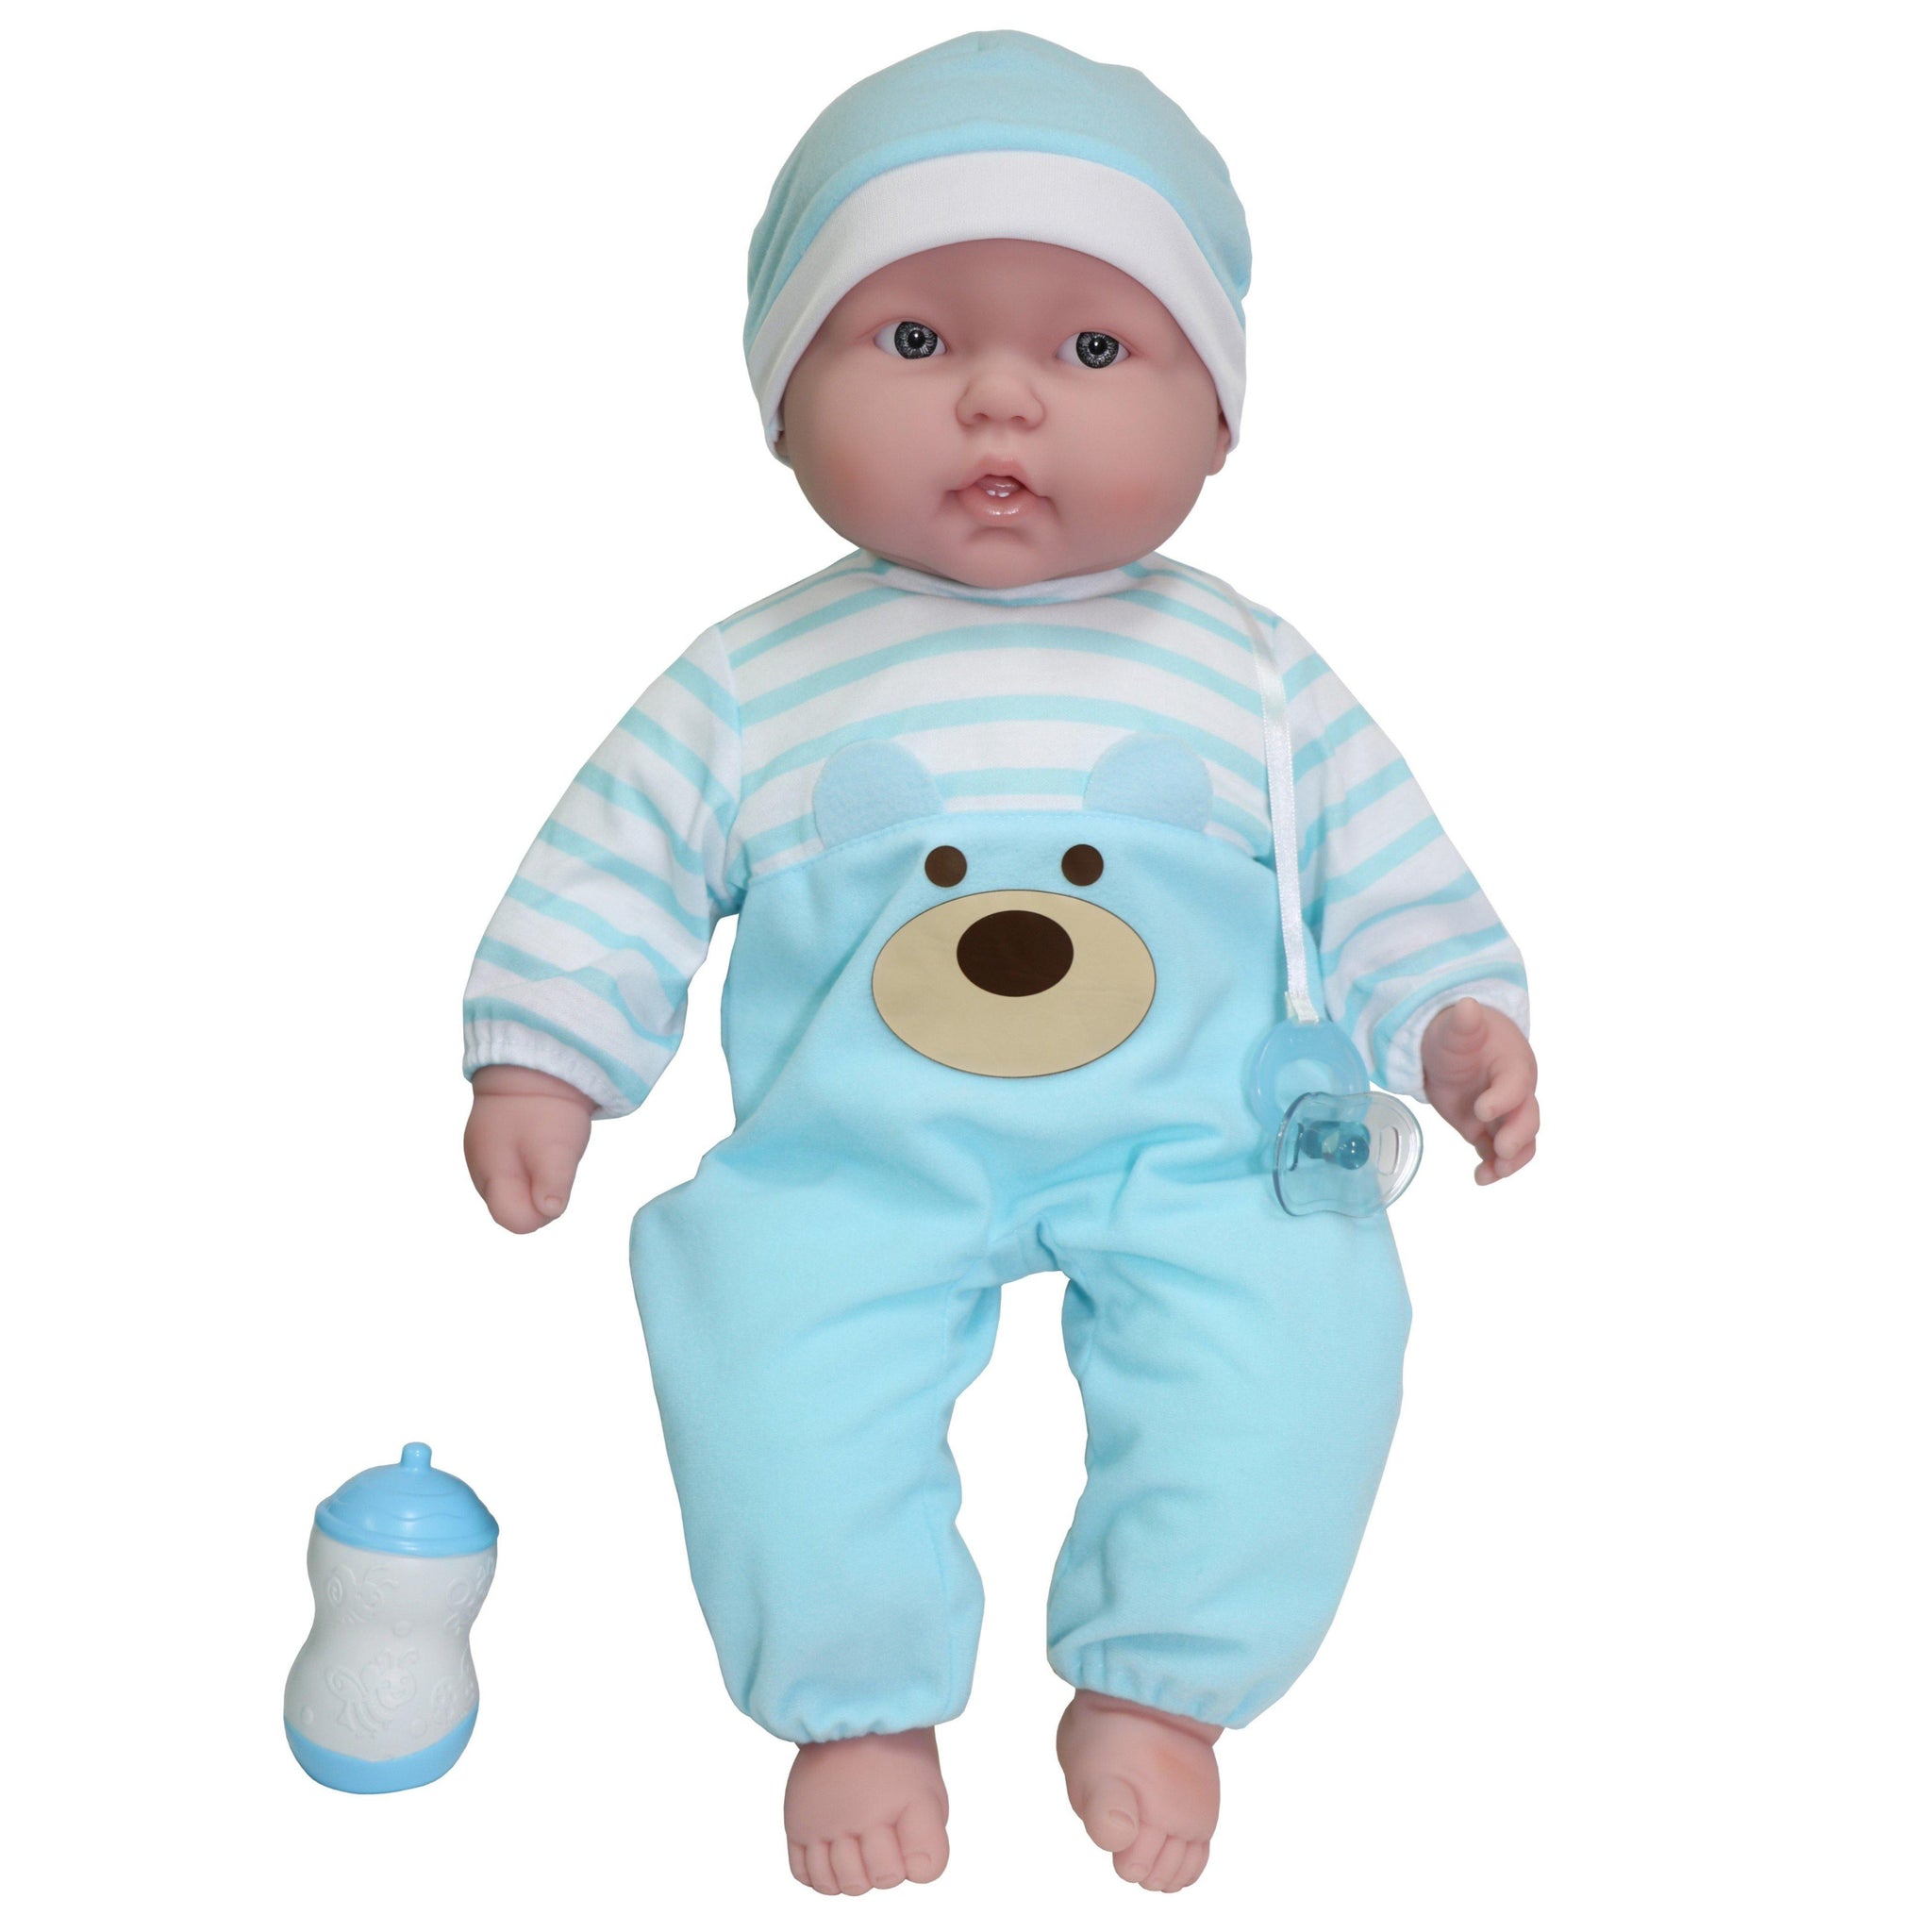 JC Toys, Lots to Cuddle Babies Soft Body Baby Doll 20 inches in Blue Outfit - JC Toys Group Inc.